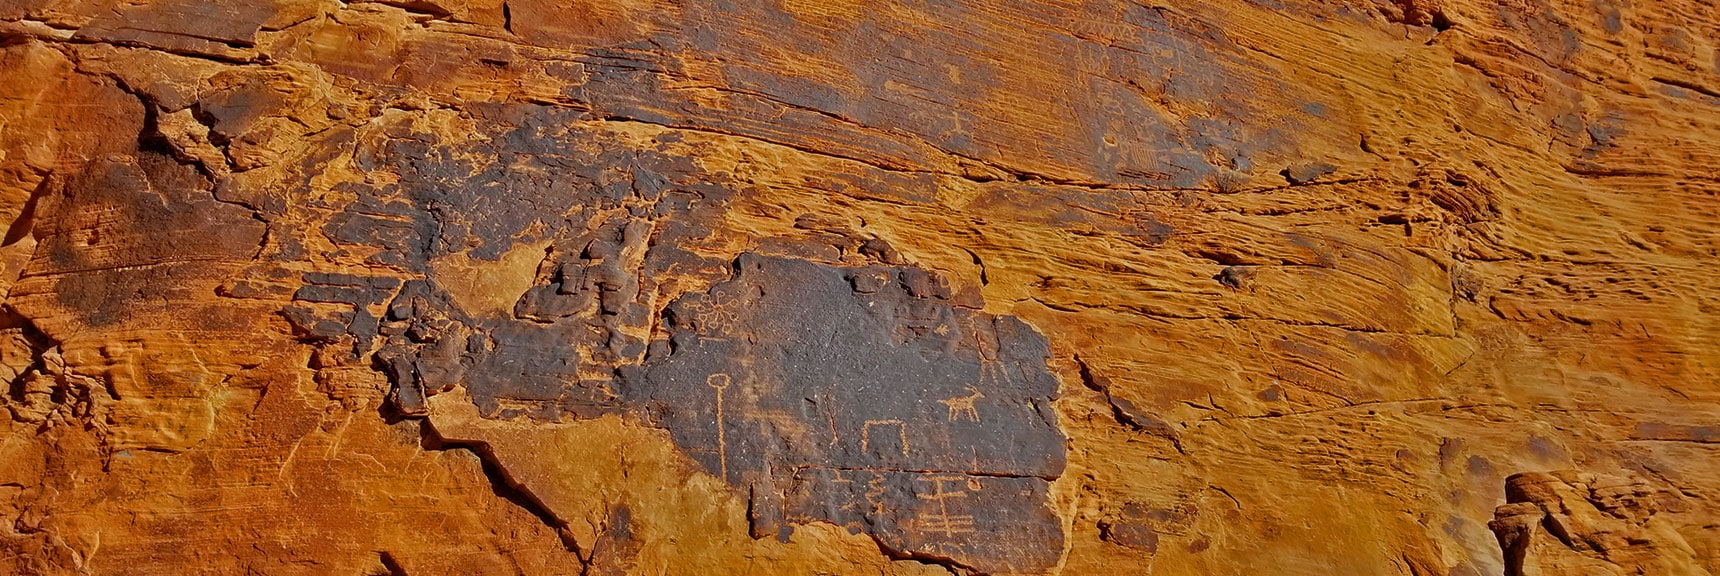 Petroglyphs on Mouse's Tank Trail in Valley of Fire State Park, Nevada, Slide 14